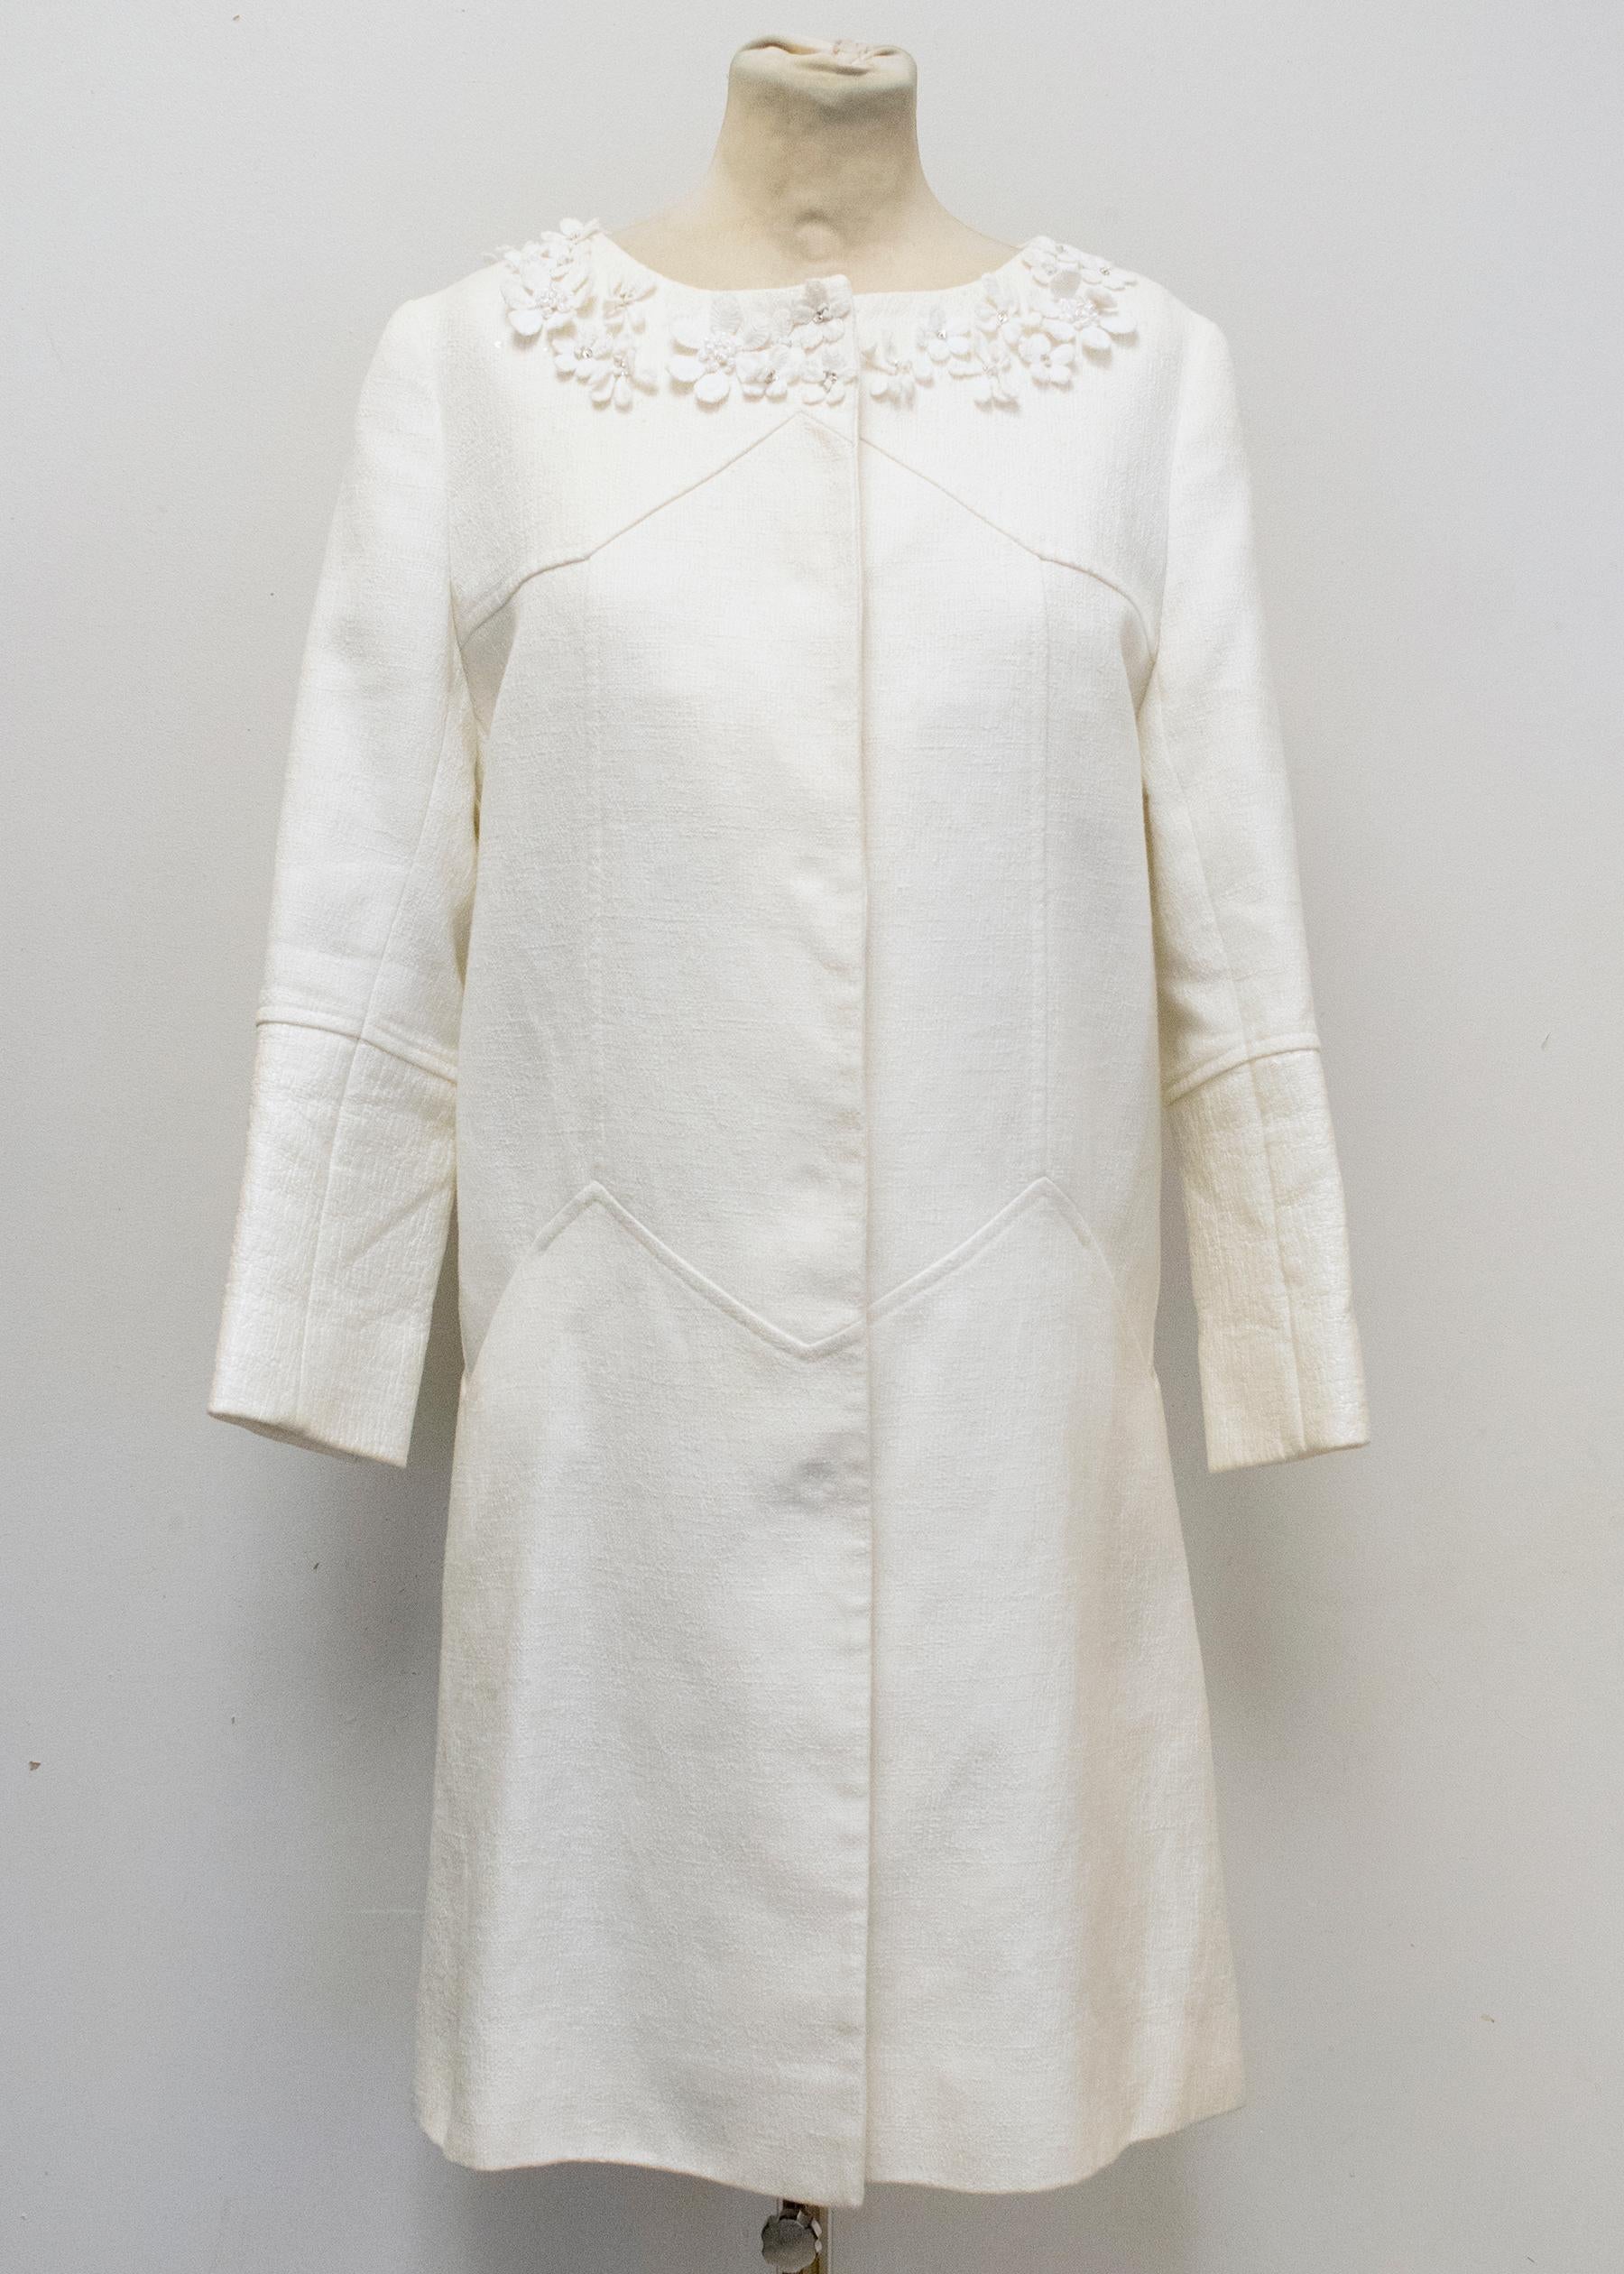 New
RRP 1125.00GBP

Simple lines and modern fabric. This coat is a summer wardrobe essential. Embroidered with clusters of daisies at the neckline, it also becomes an ornate piece for the evening.
The neckline is trimmed with daisy lace embroidery,